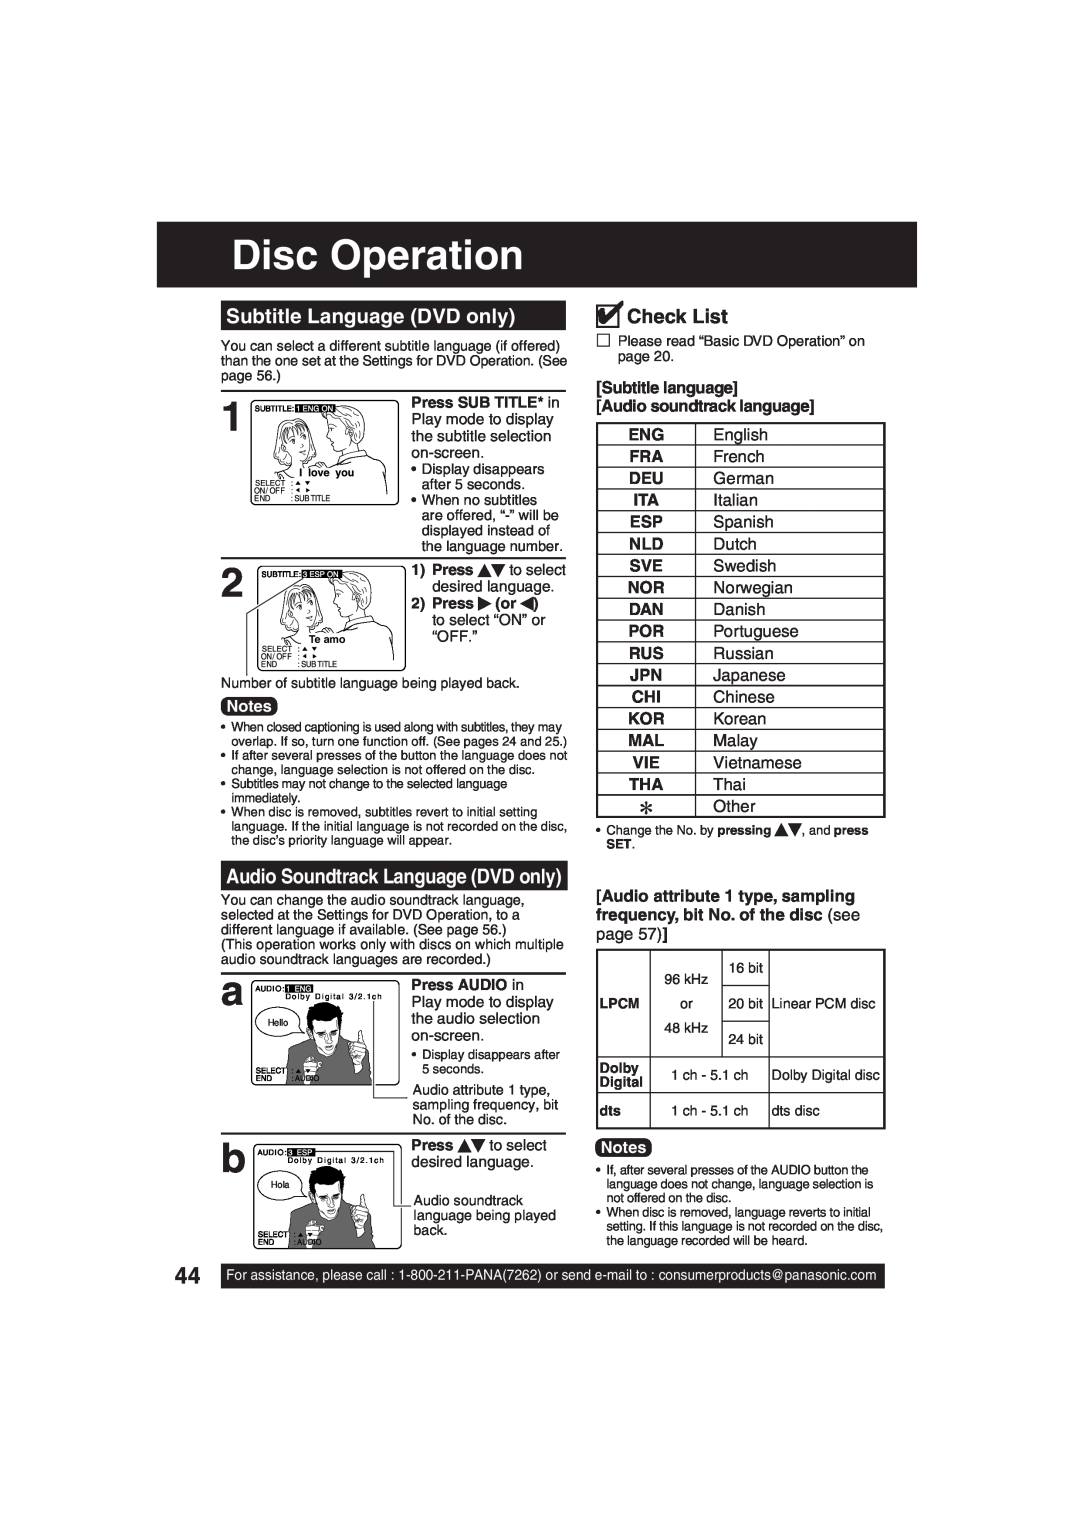 Panasonic PV-DF203, PV-DF273 Disc Operation, Subtitle Language DVD only, Check List, Audio Soundtrack Language DVD only 